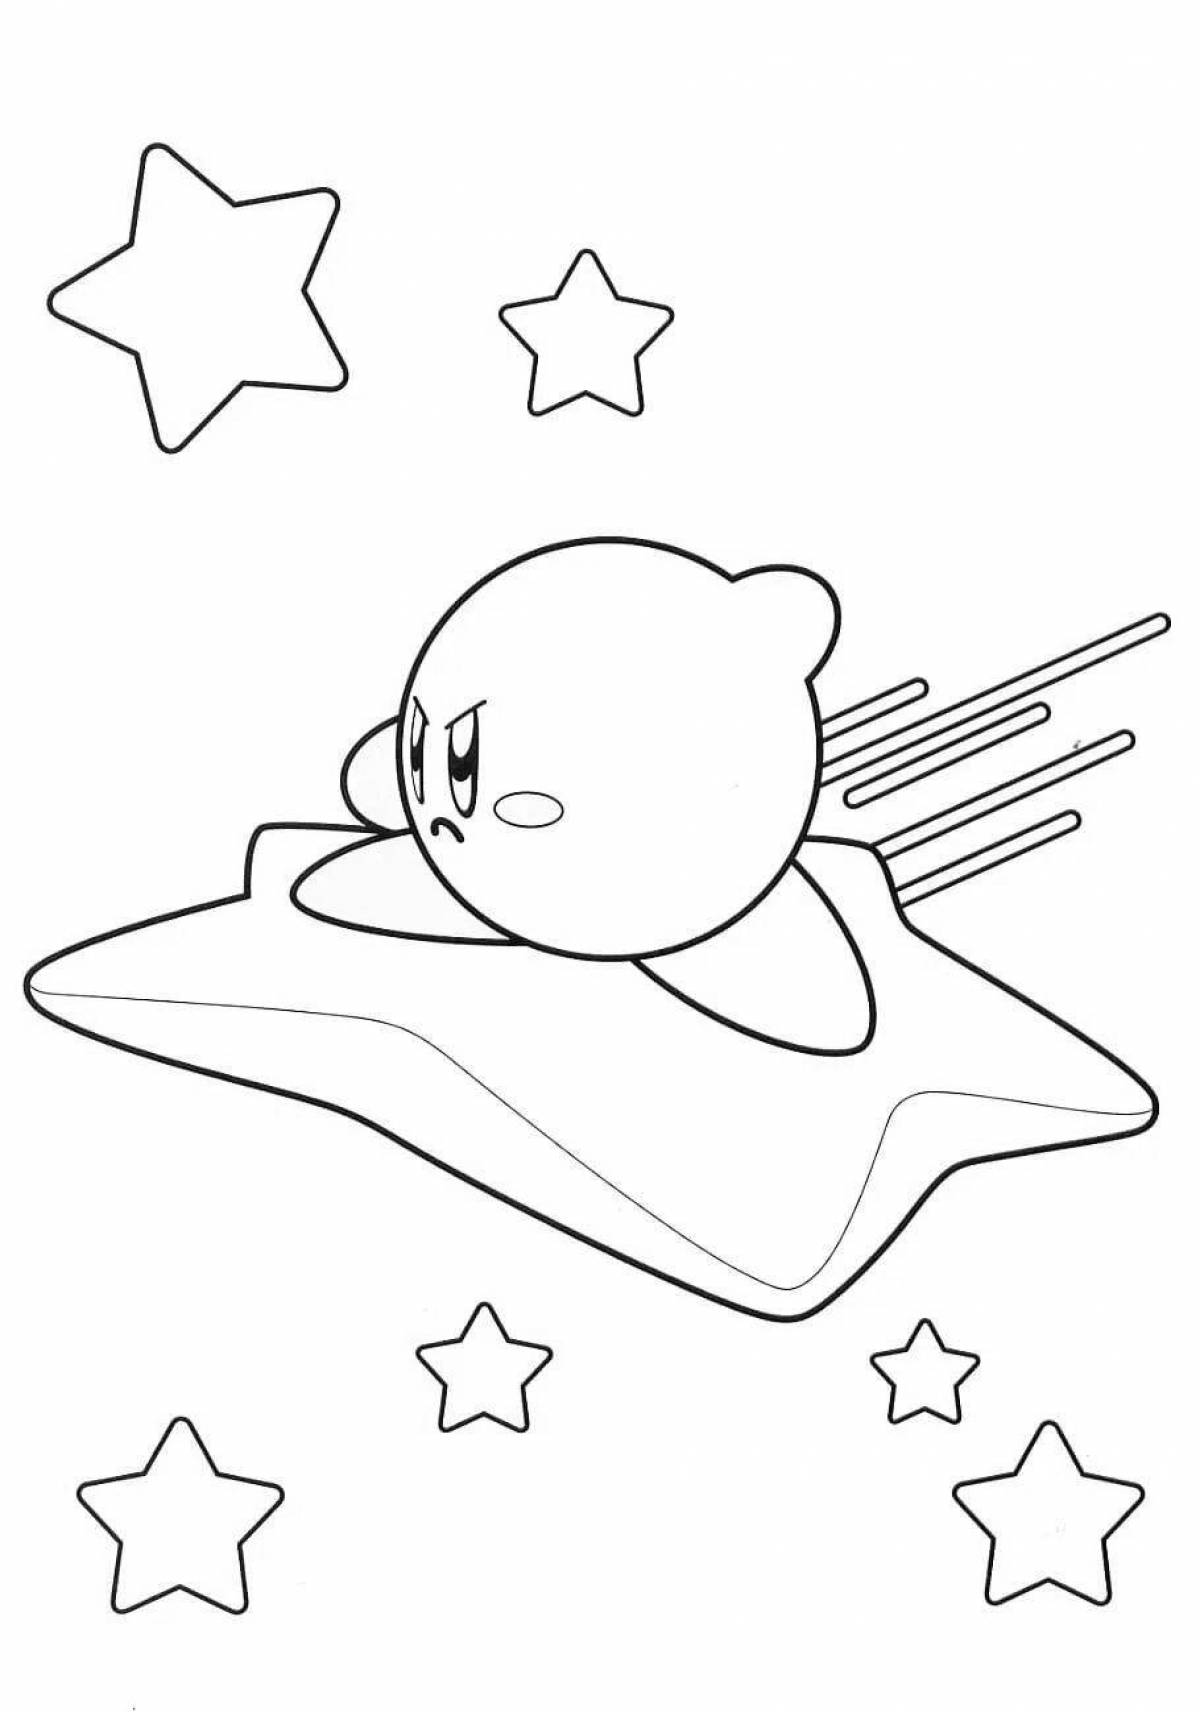 Coloring page energetic kirby